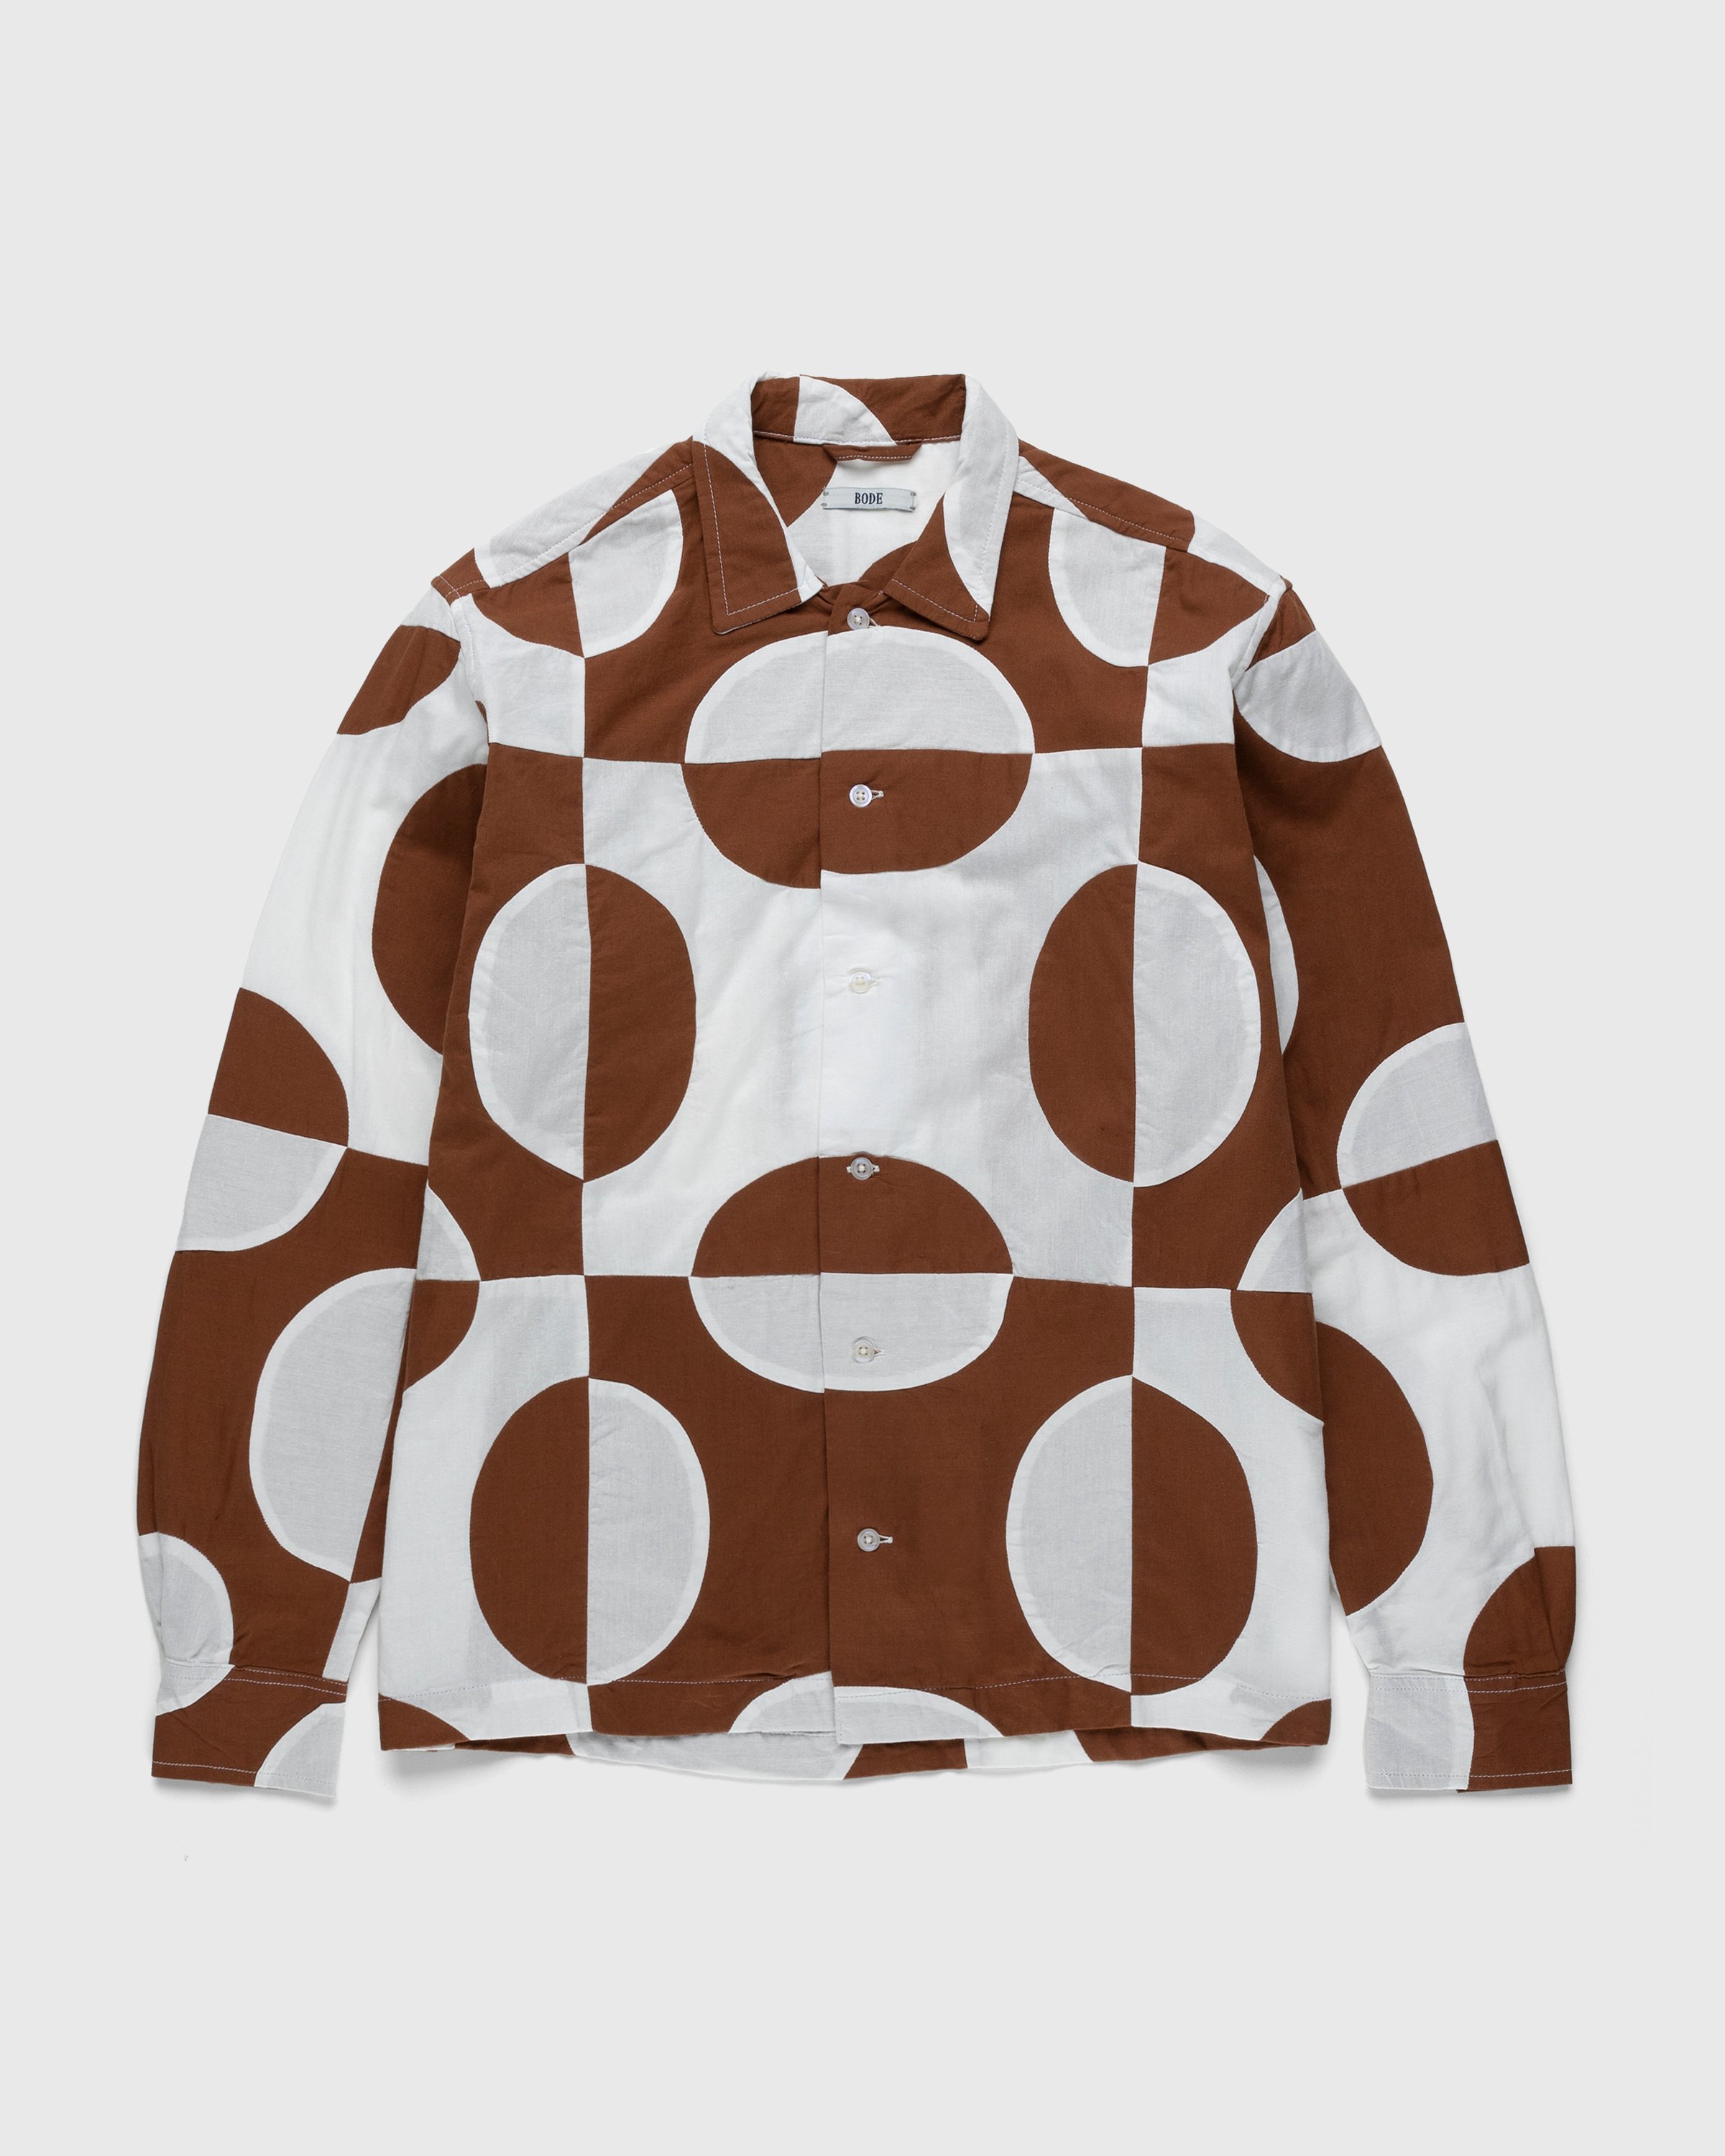 Bode - Duo Oval Patchwork Long-Sleeve Shirt Brown - Clothing - Multi - Image 1